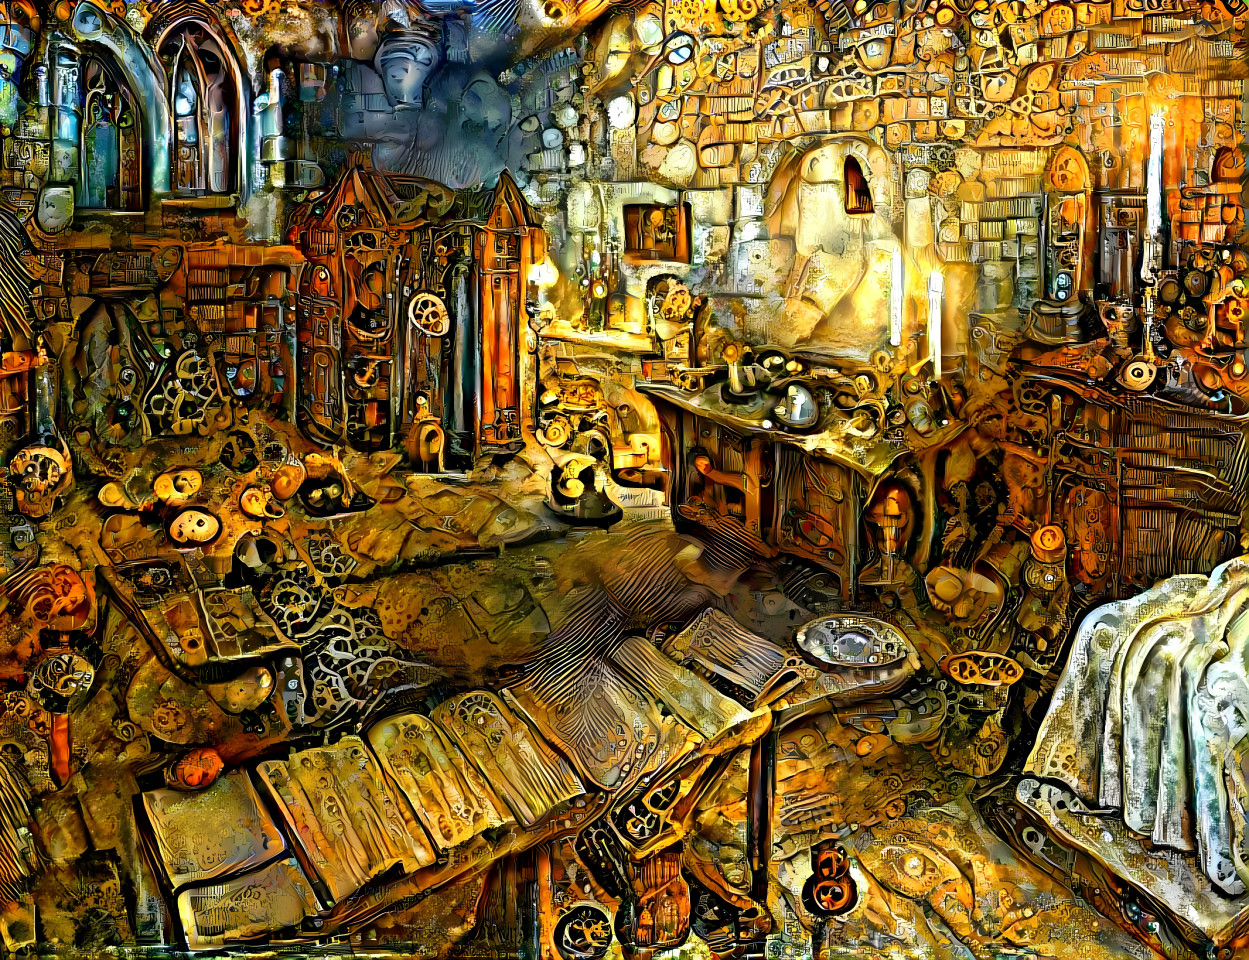 Another Medieval room full of clutter